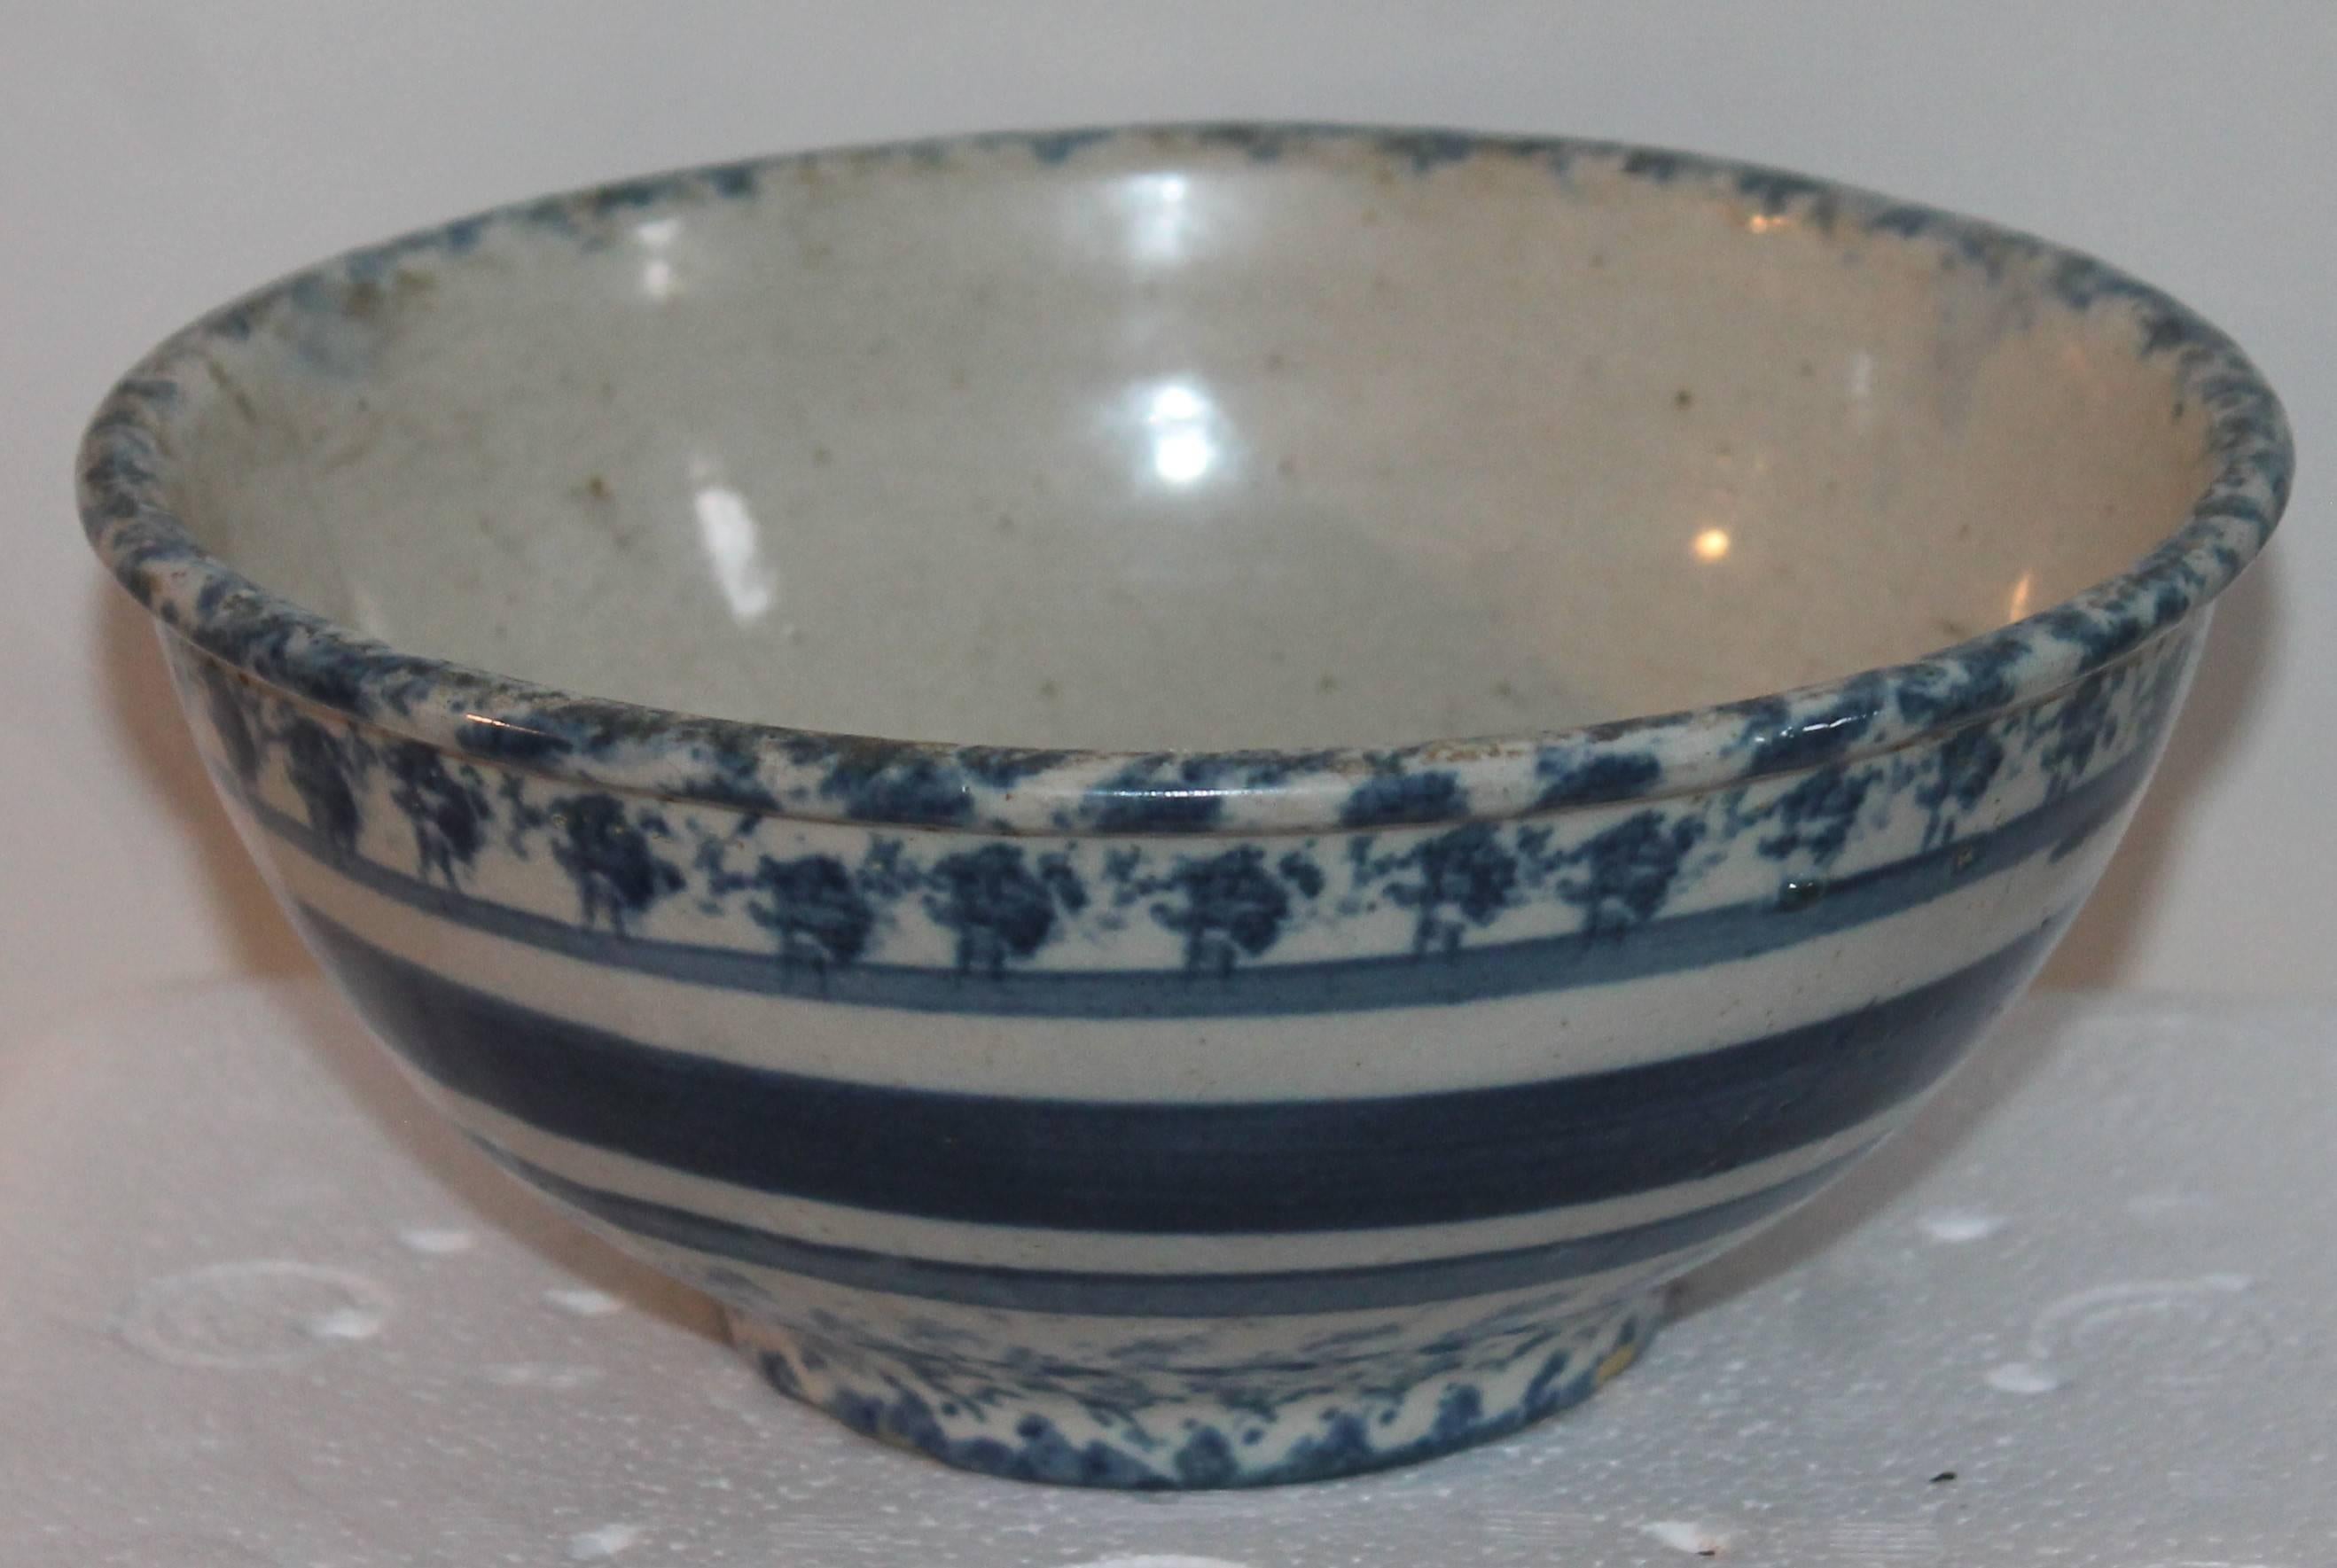 19th century sponge ware bowl. Beautiful stripes and pattern on this bowl show age of wear consistent with age and use. Shows some dings but in great usable condition.